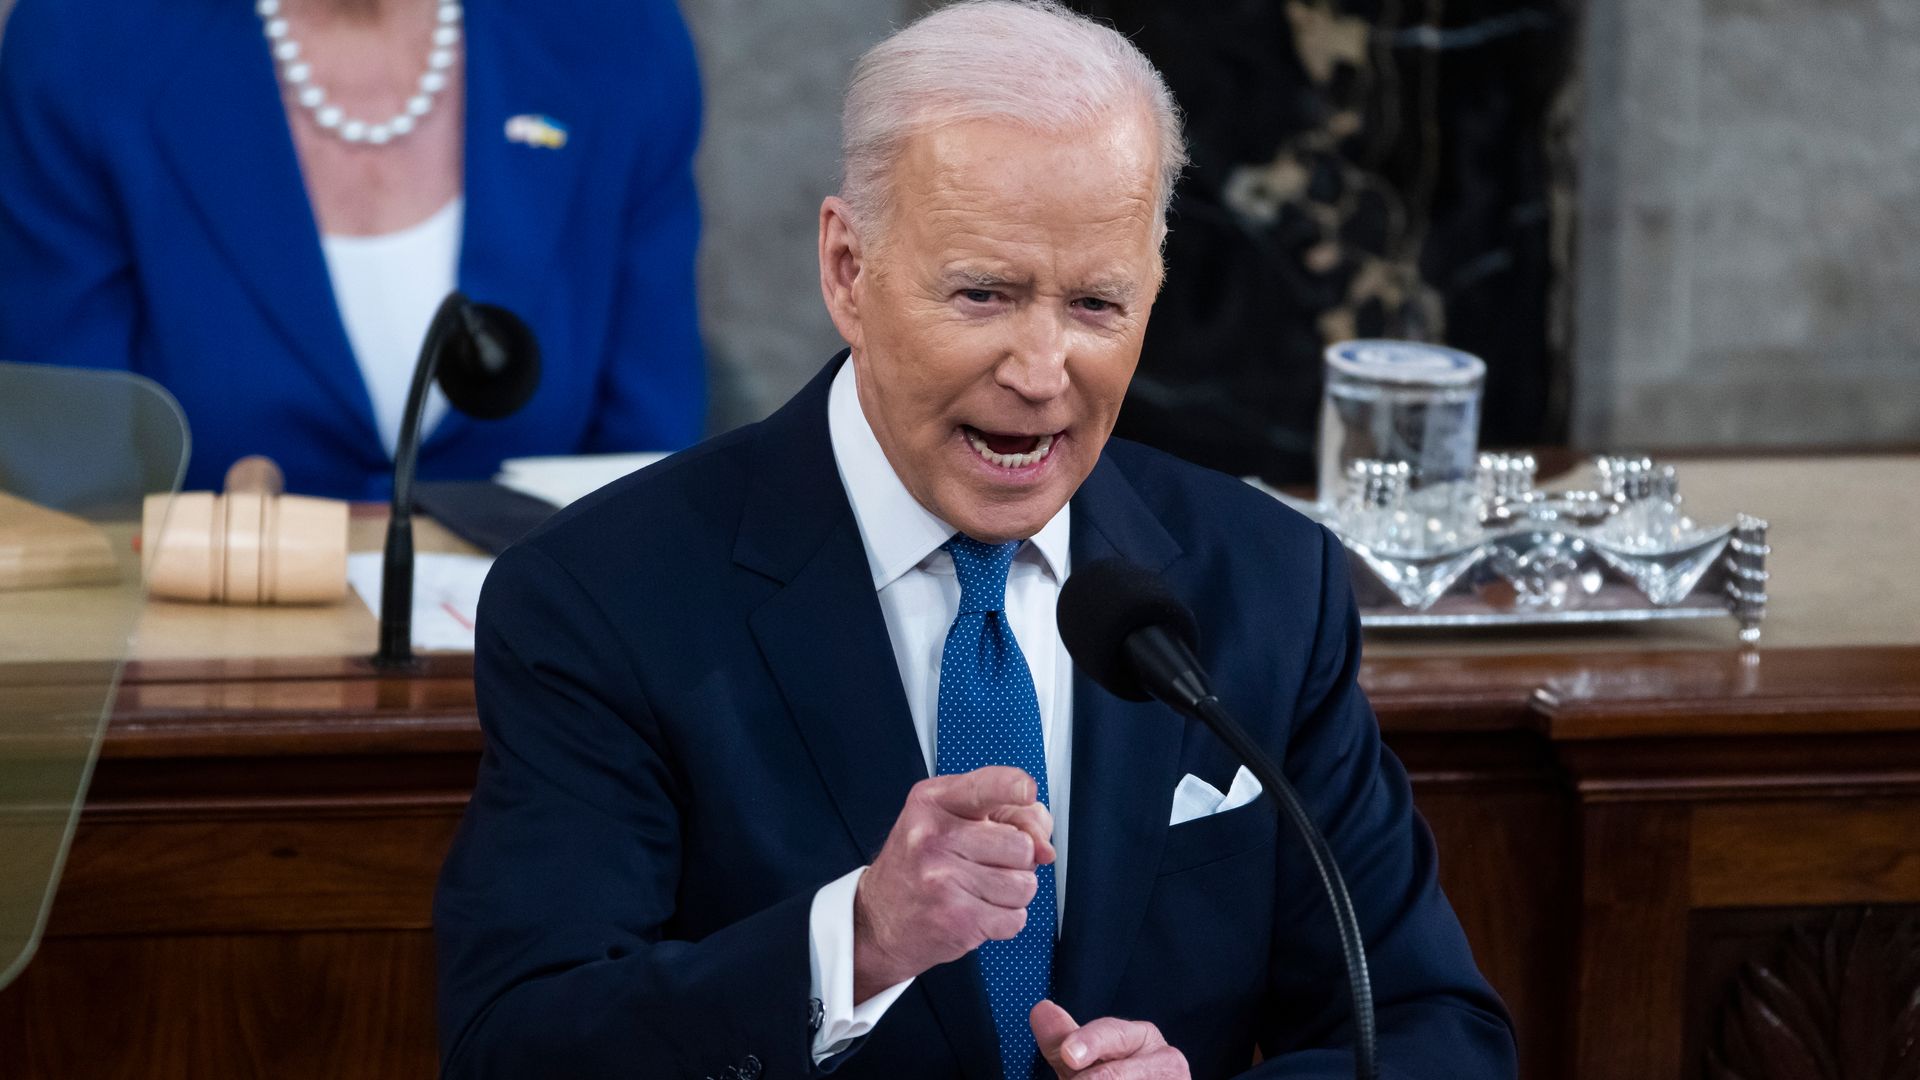 Photo of President Biden at the lectern pointing his finger